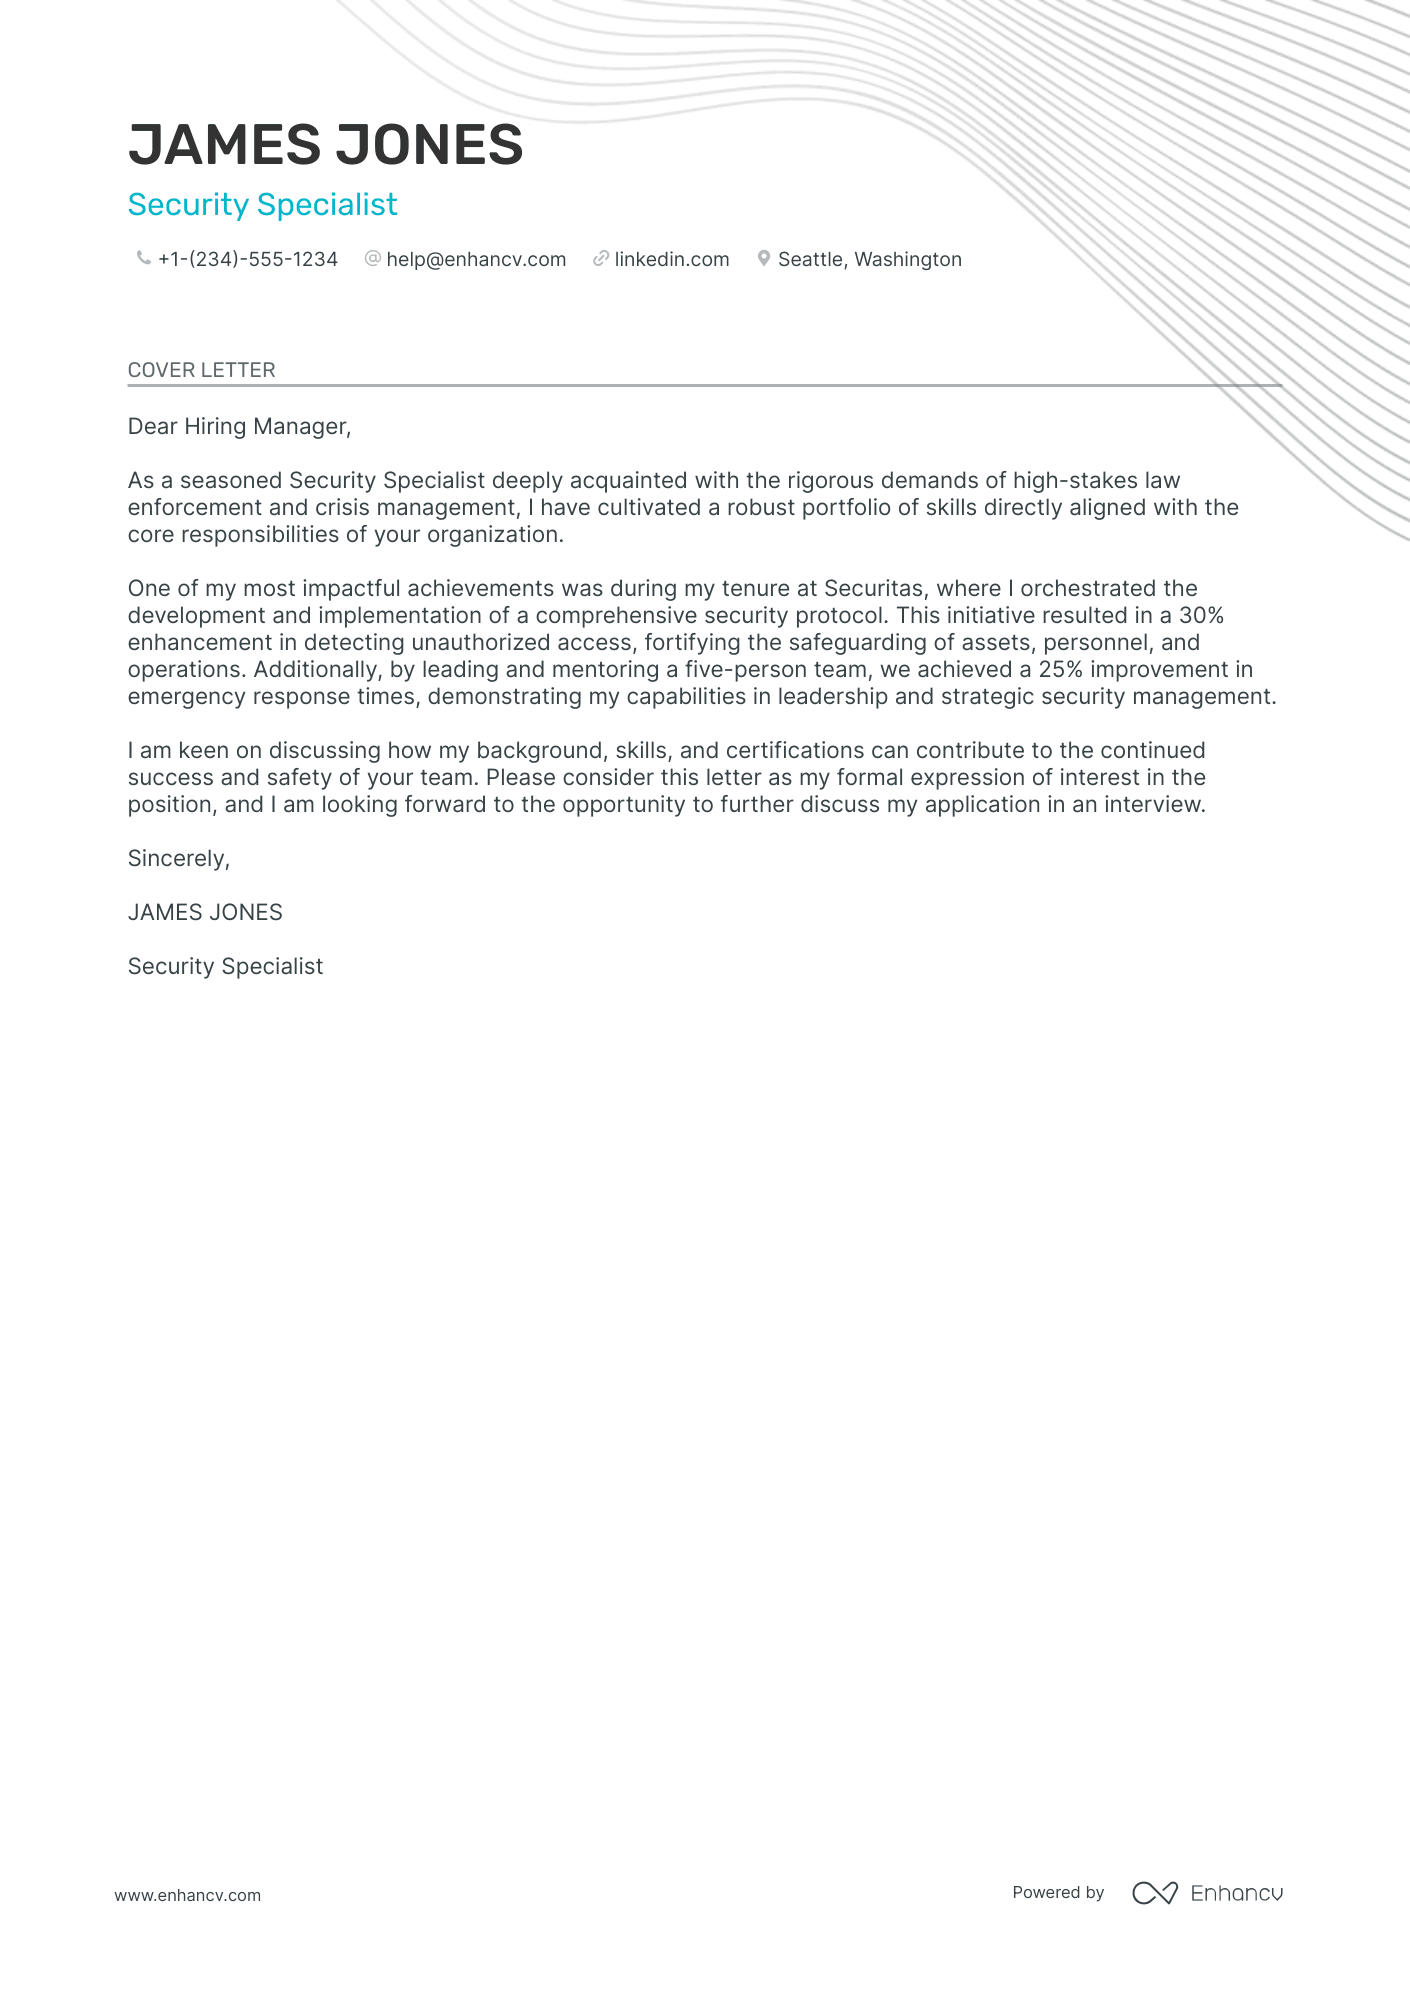 sample of an application letter for a security job